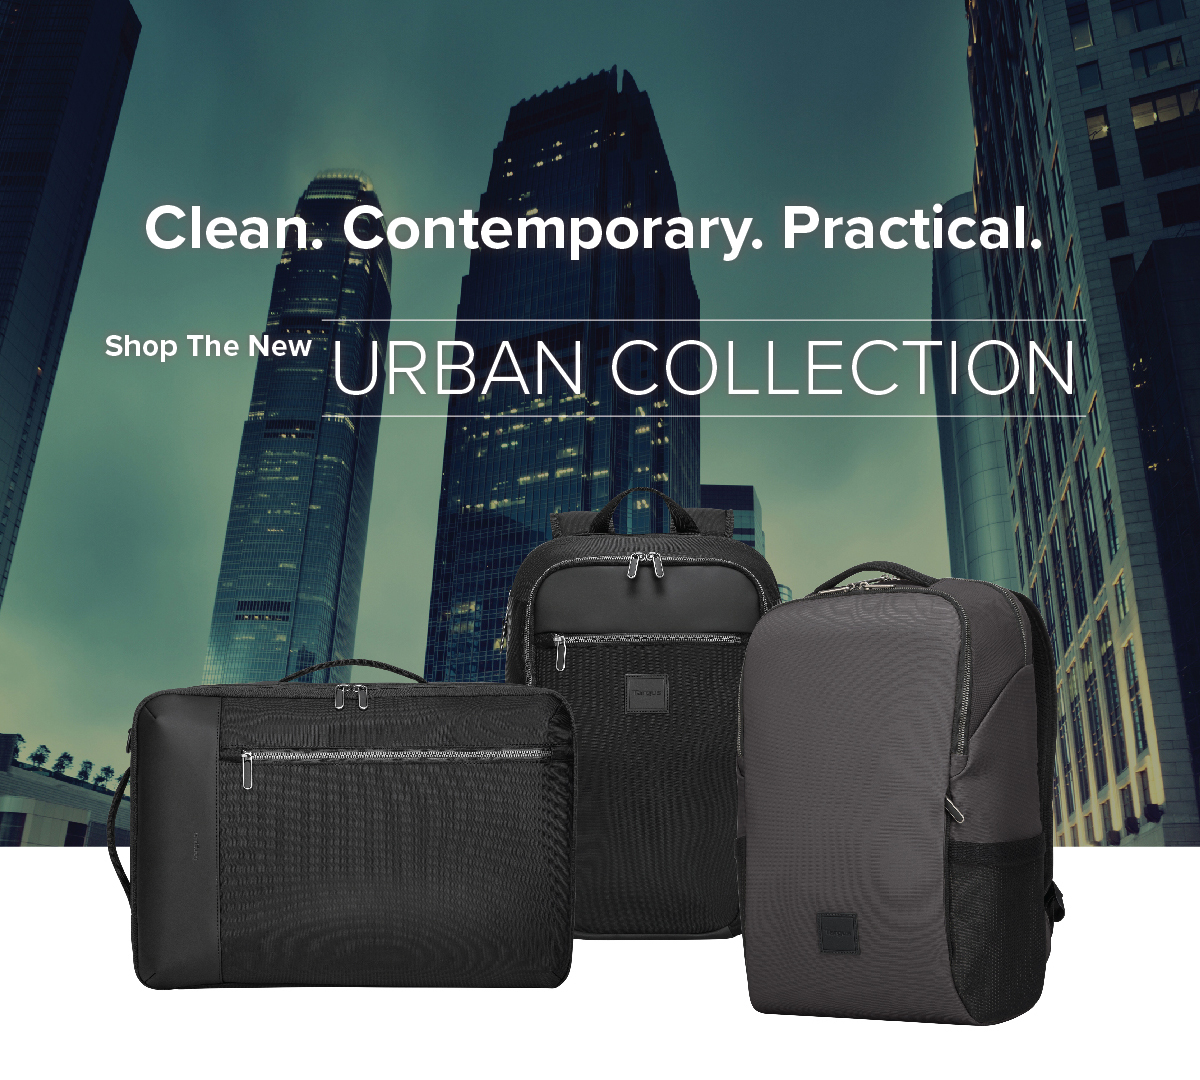 Clean. Contemporary. Practical. | Shop The New Urban Collection